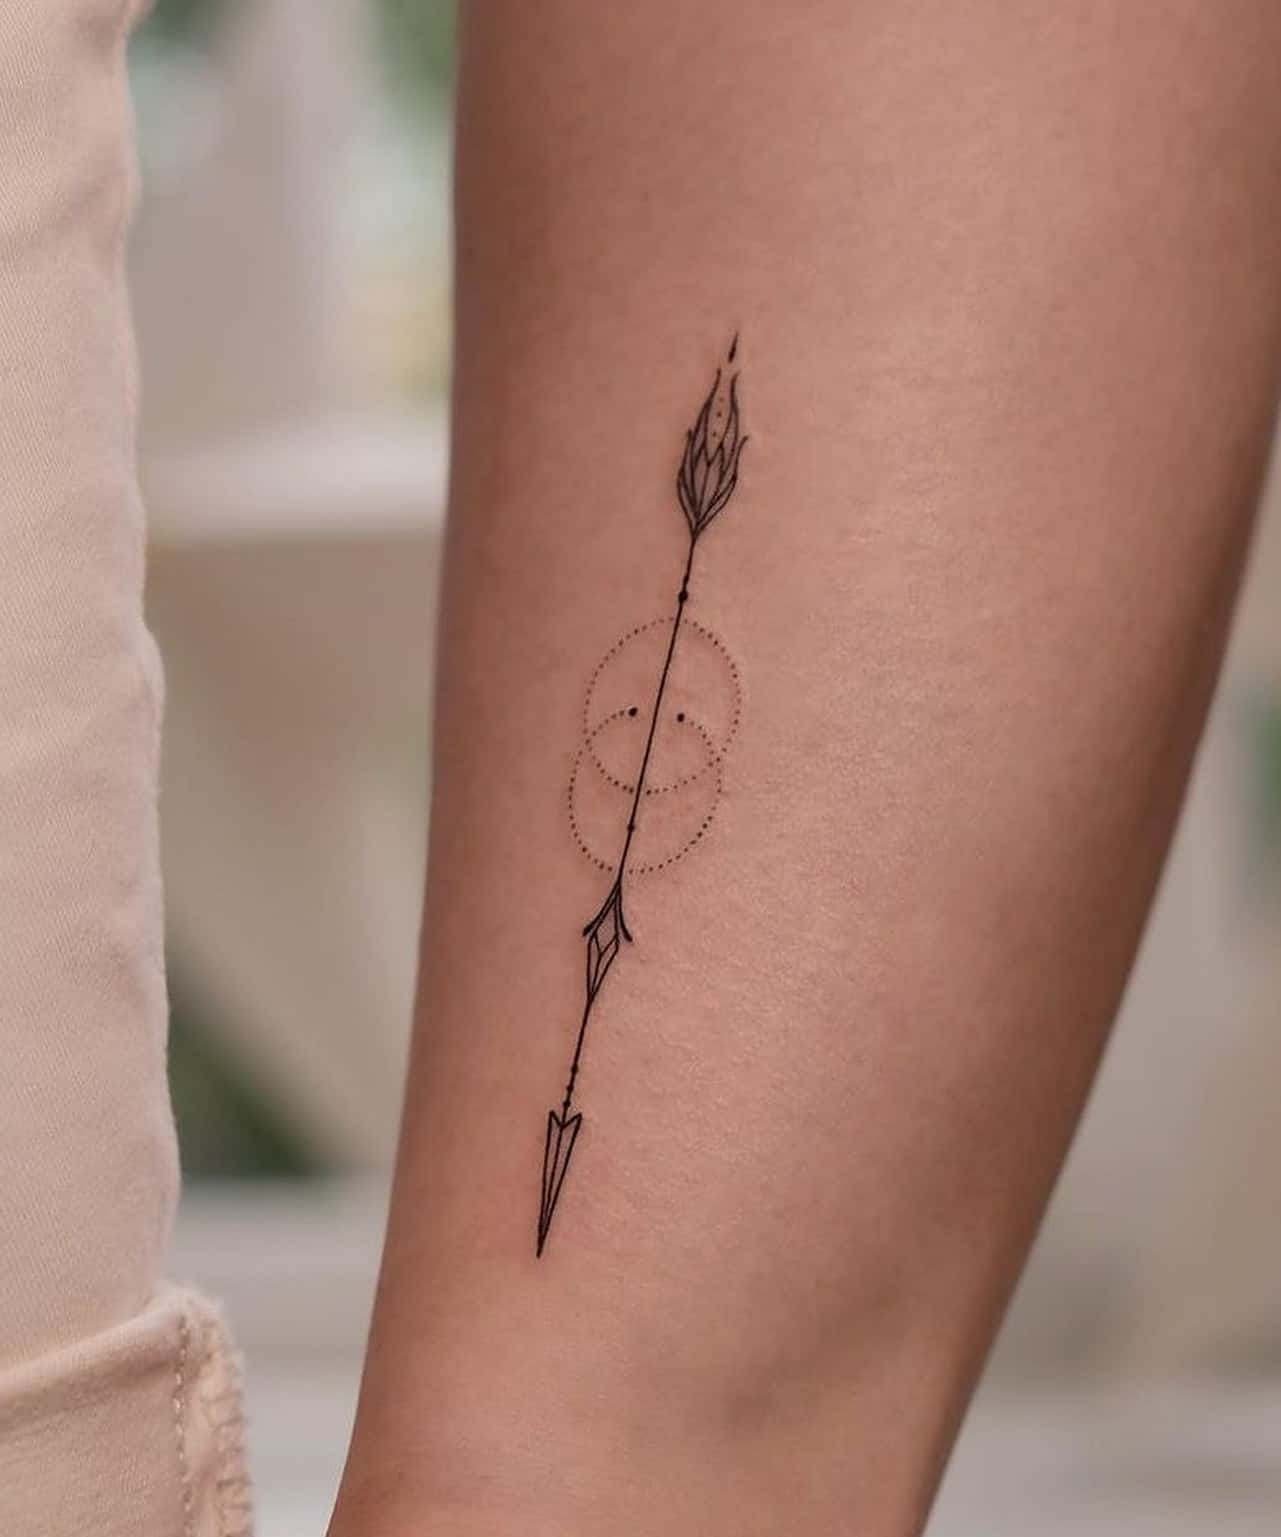 Inkholics Tattoos, Piercing and Art Studio - An arrow through a diamond  symbol can represent courage as one moves forward. They also say, A  solitary arrow represents defense and protection from harm.